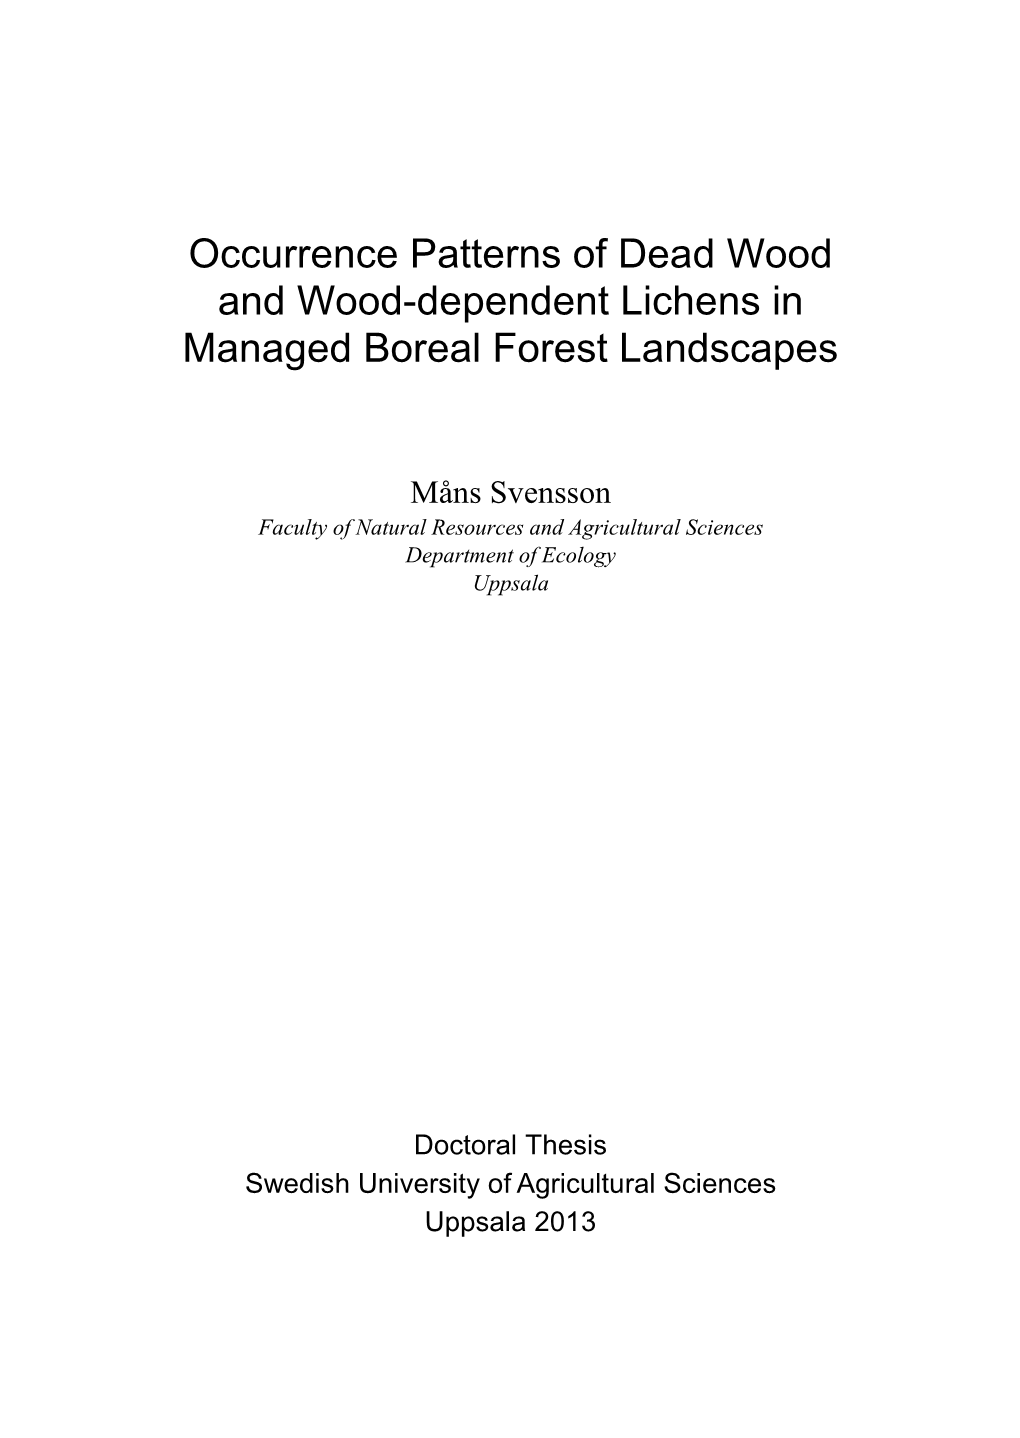 Occurrence Patterns of Dead Wood and Wood-Dependent Lichens in Managed Boreal Forest Landscapes